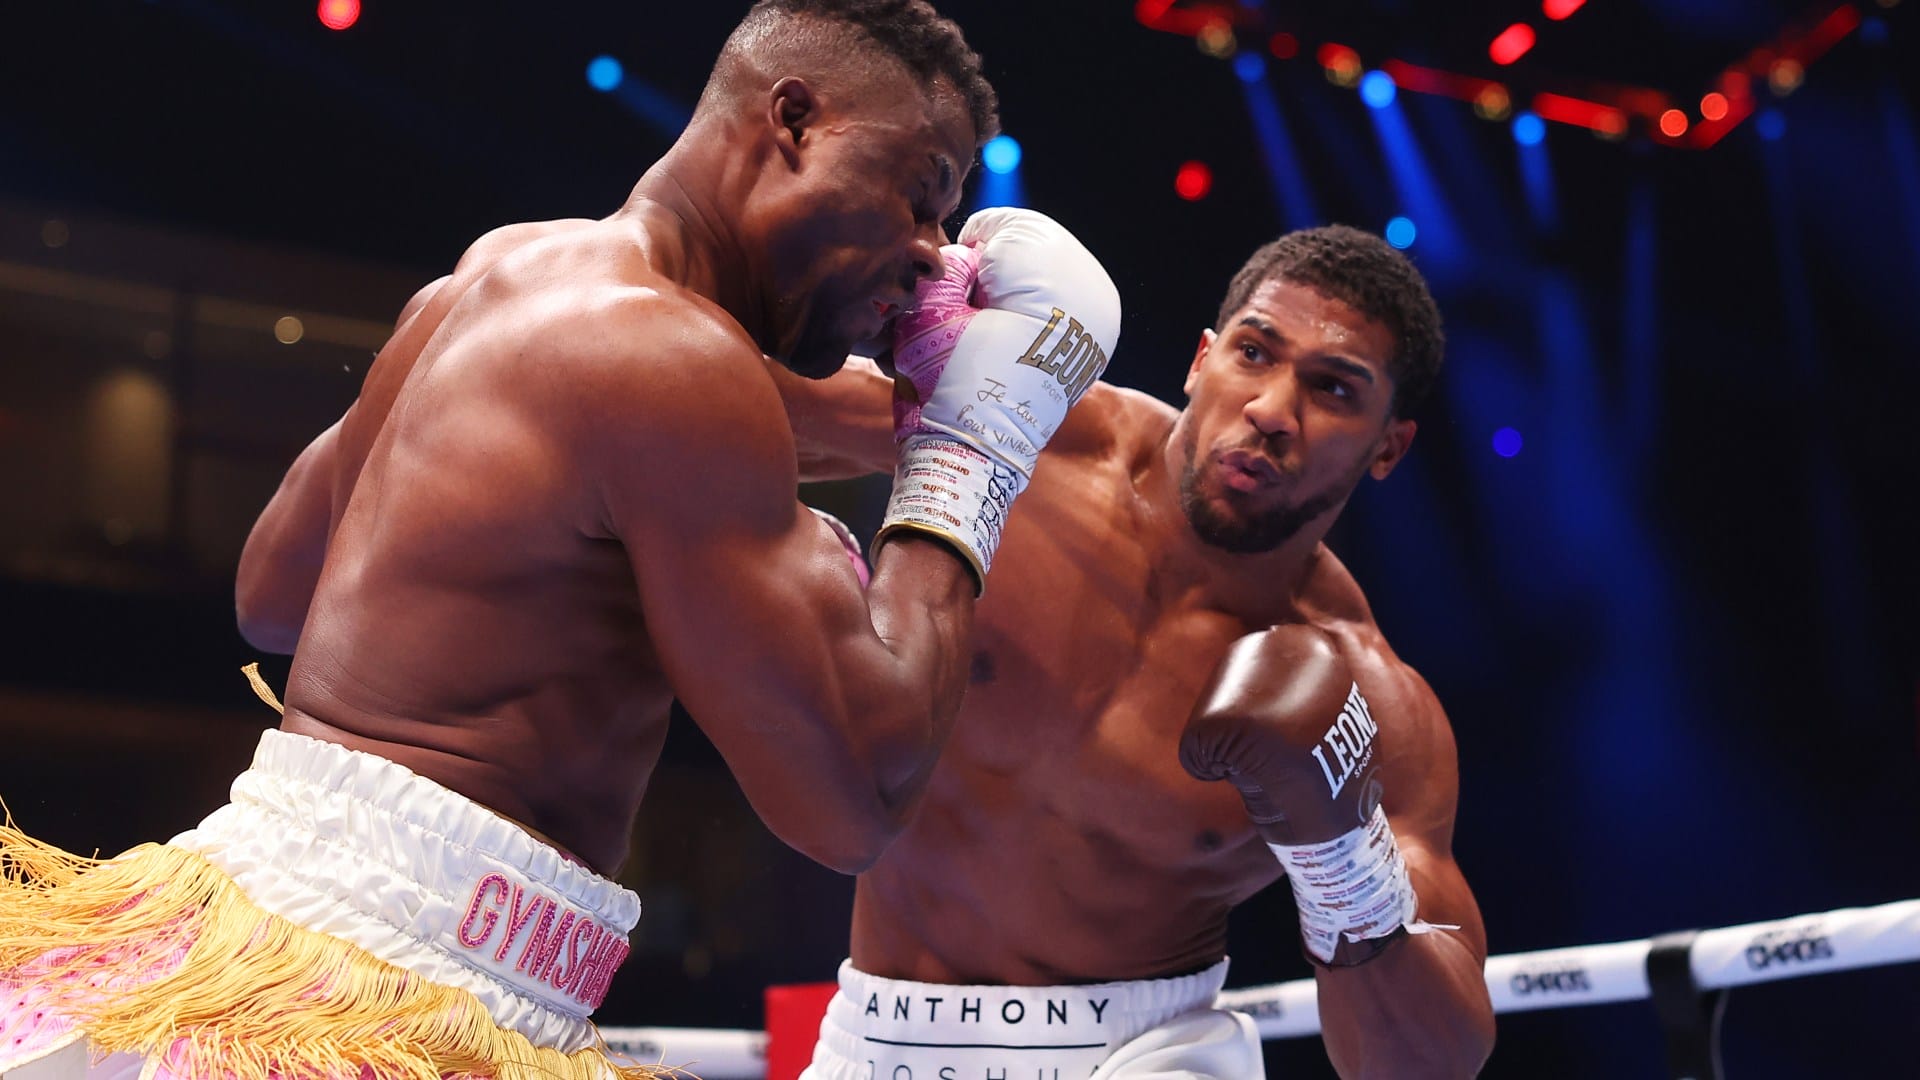 Anthony Joshua vs Francis Ngannou LIVE RESULT: Brutal AJ knocks out MMA star and speaks on Tyson Fury next - latest